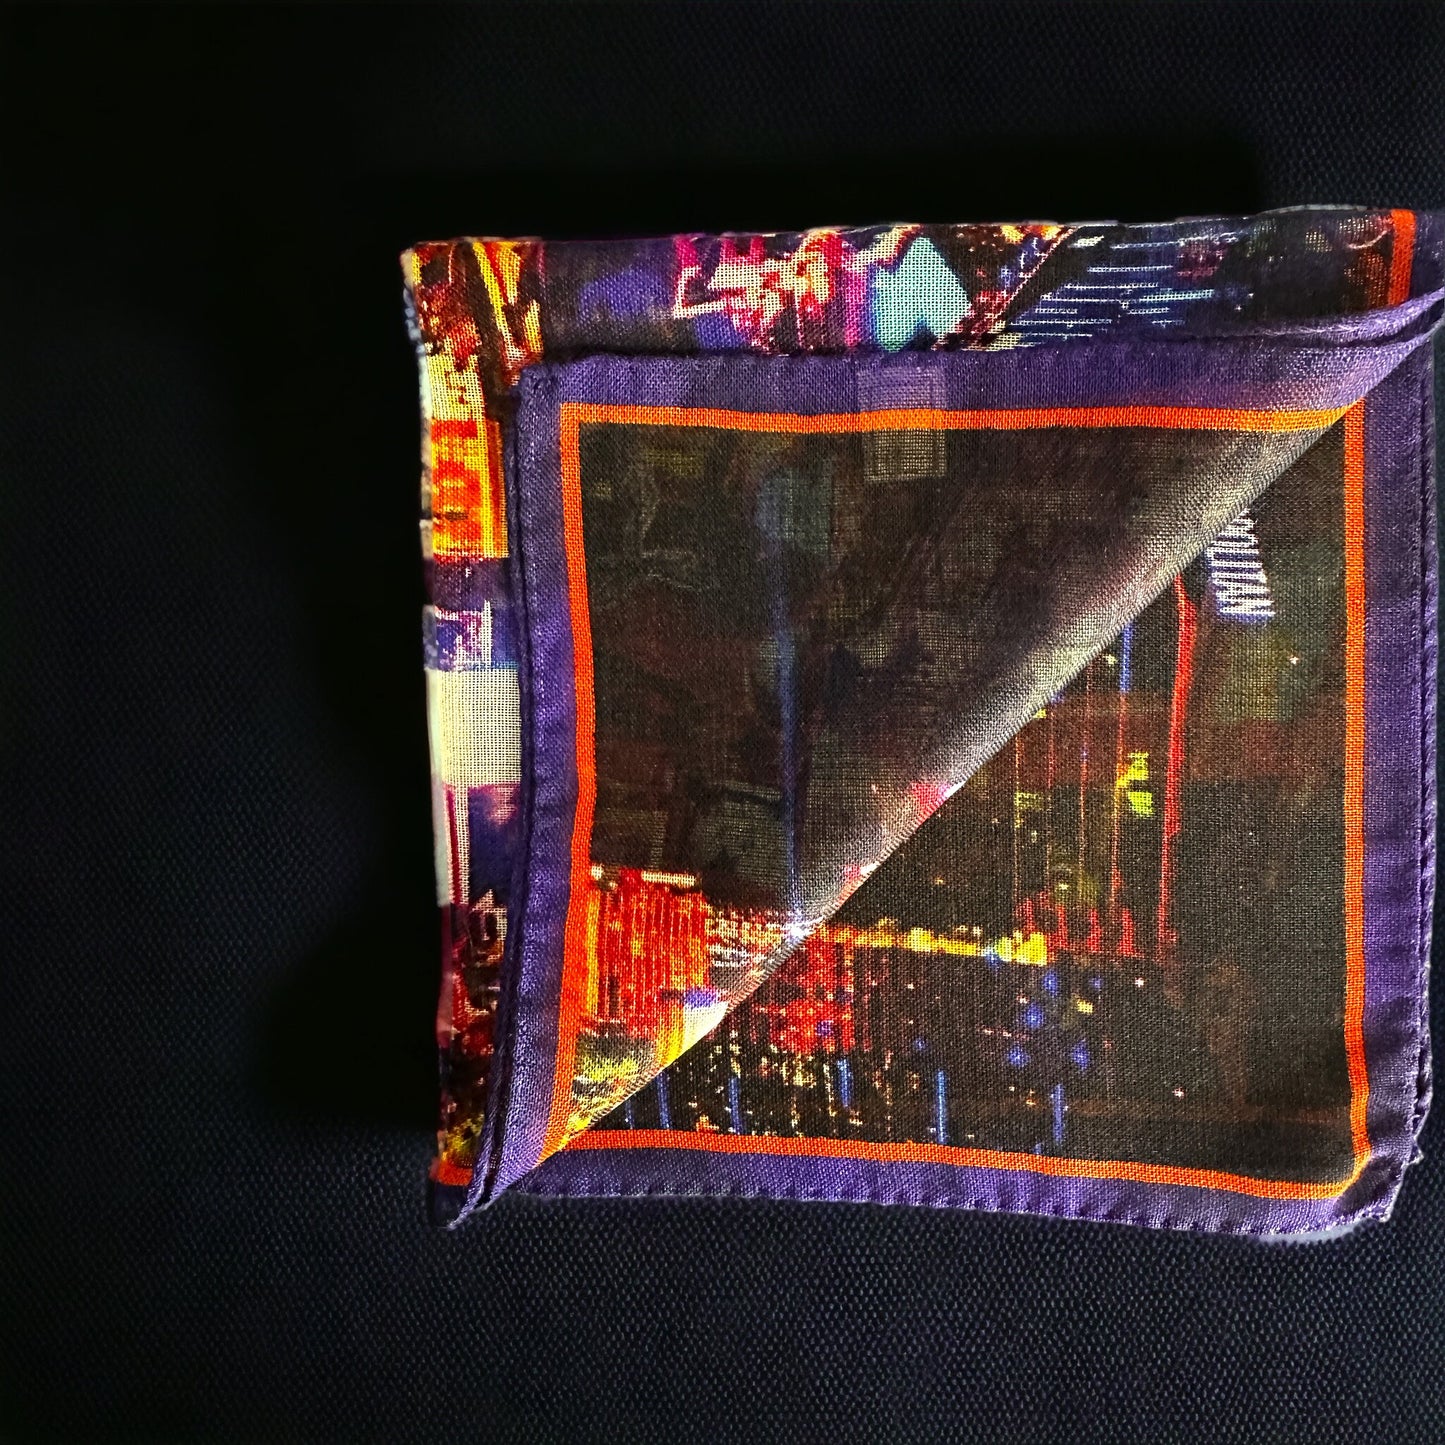 New designs in beautiful and colorful pocket square for your new sport jacket or suit. Adding color and casualness to any outfit these pocket squares depict different exotic cities across the world. Here we have the Las Vegas strip showing the Cosmopolitan Hotel and Casino. Hand rolled edge. Made in Italy. 14 x14 inches.